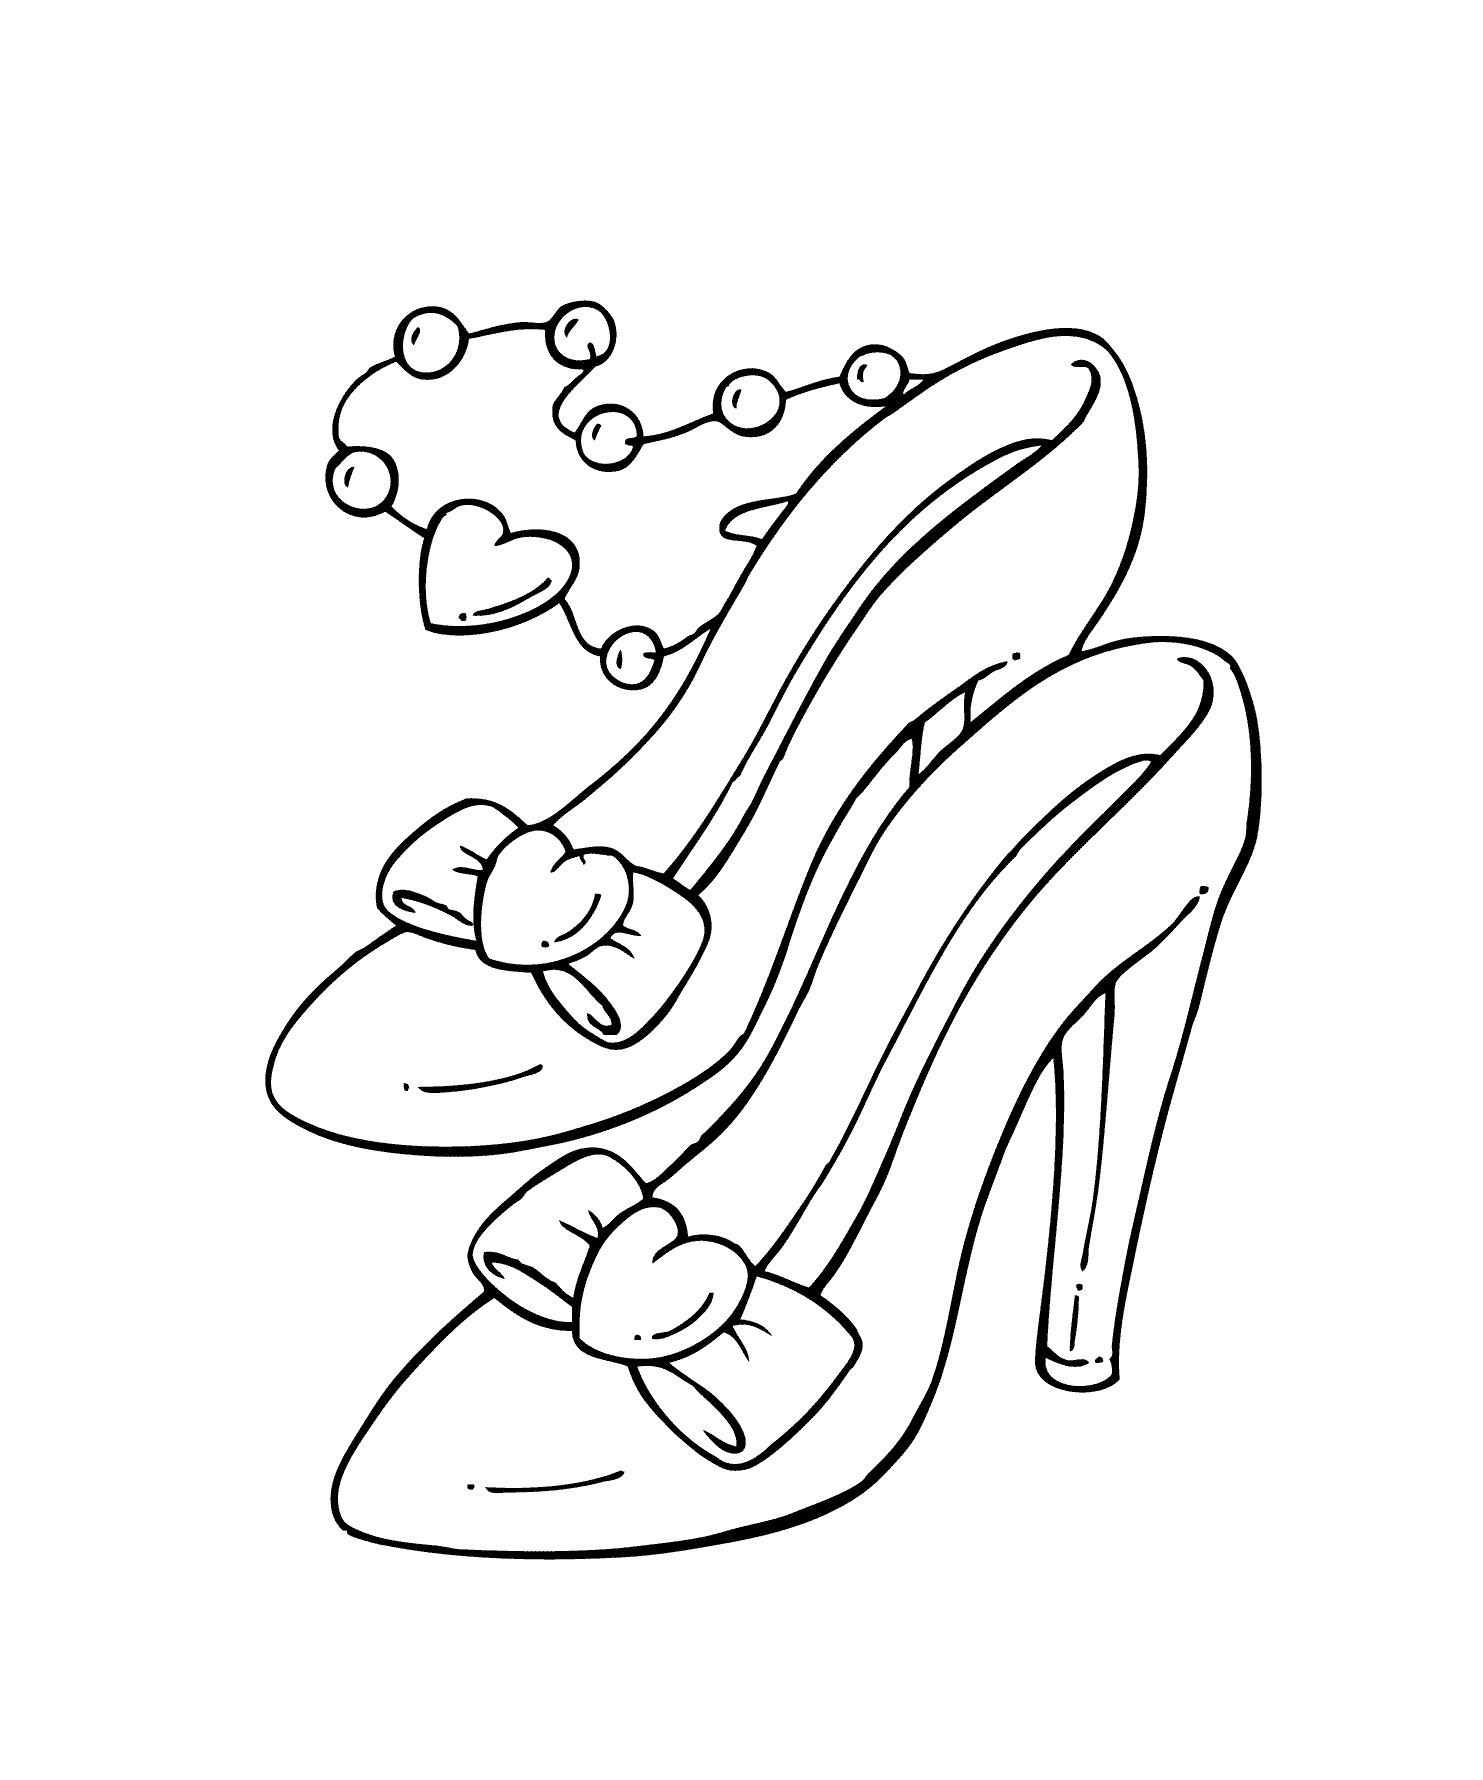 Pretty Shoes Coloring Page